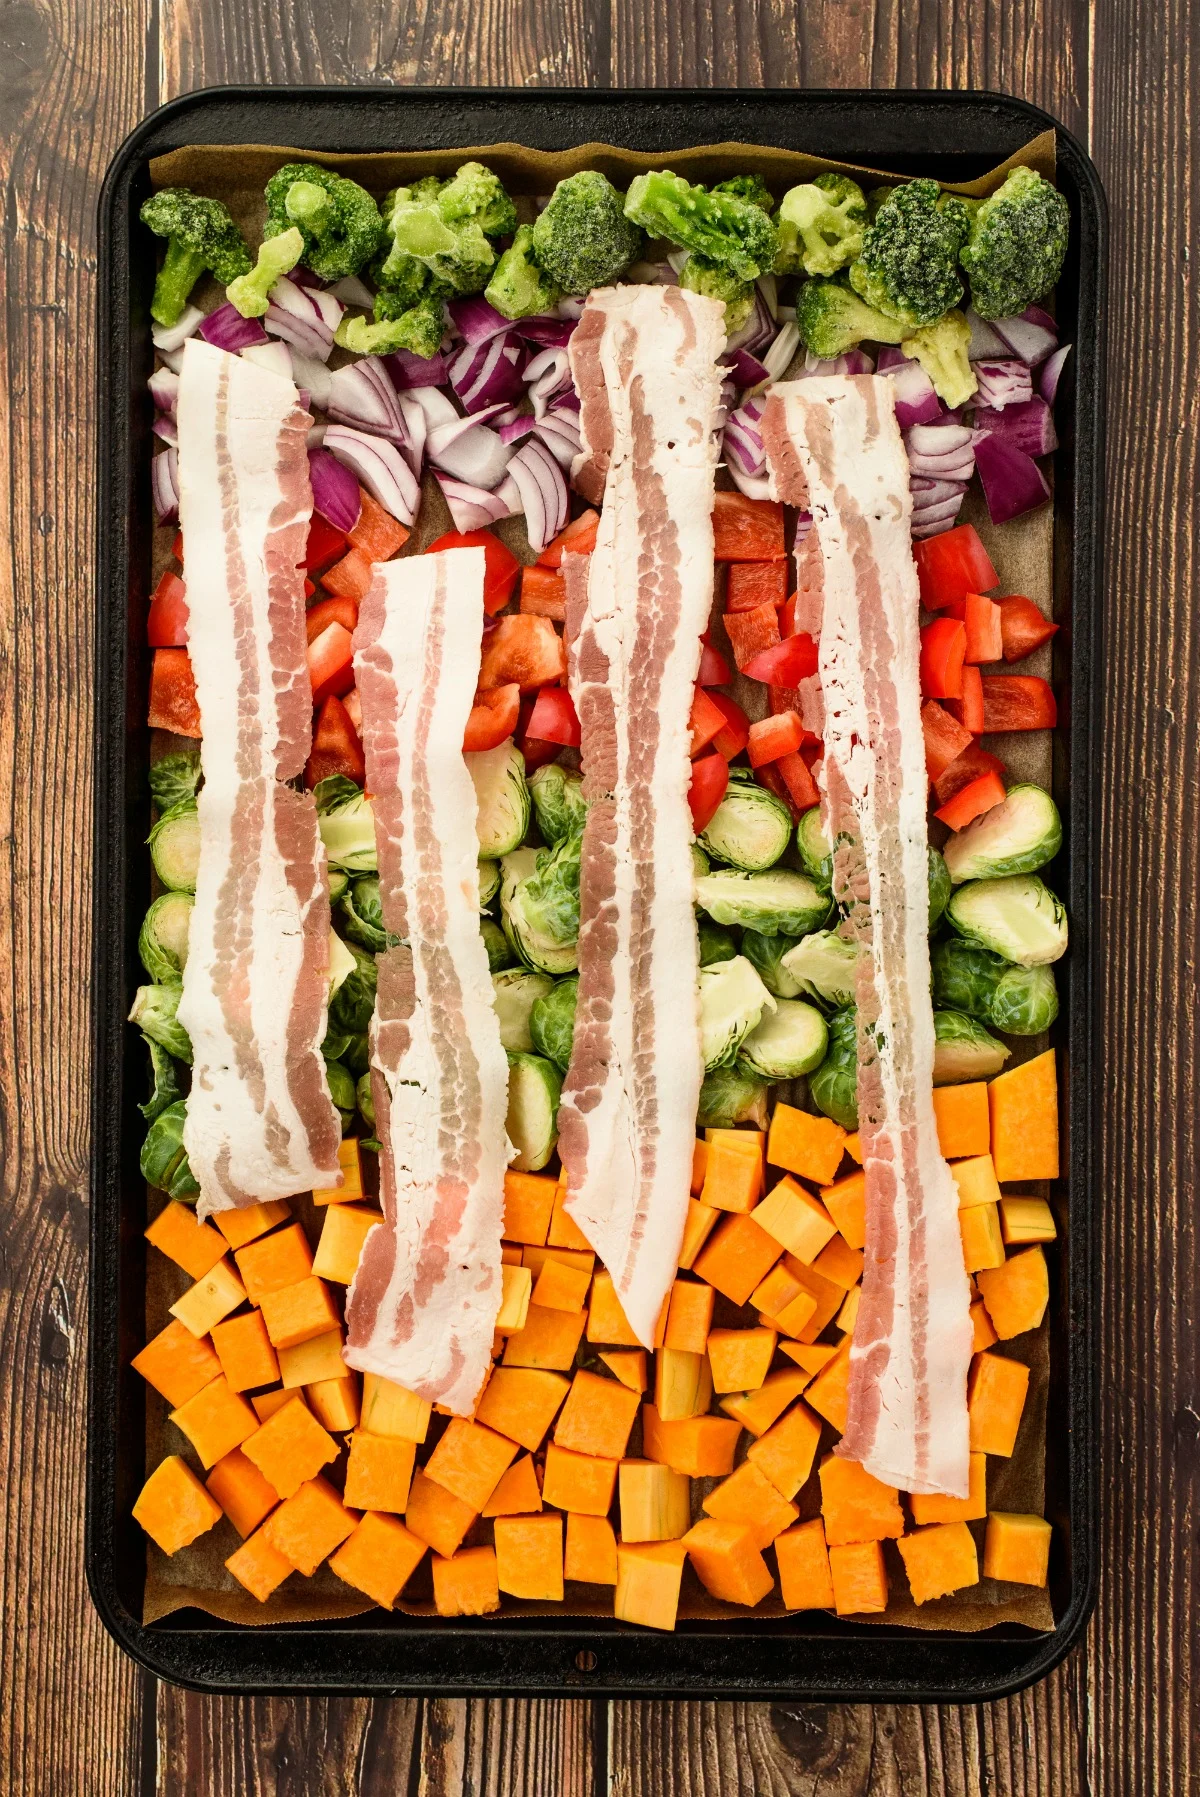 Vegetables on a sheet pan with slices of bacon on top.